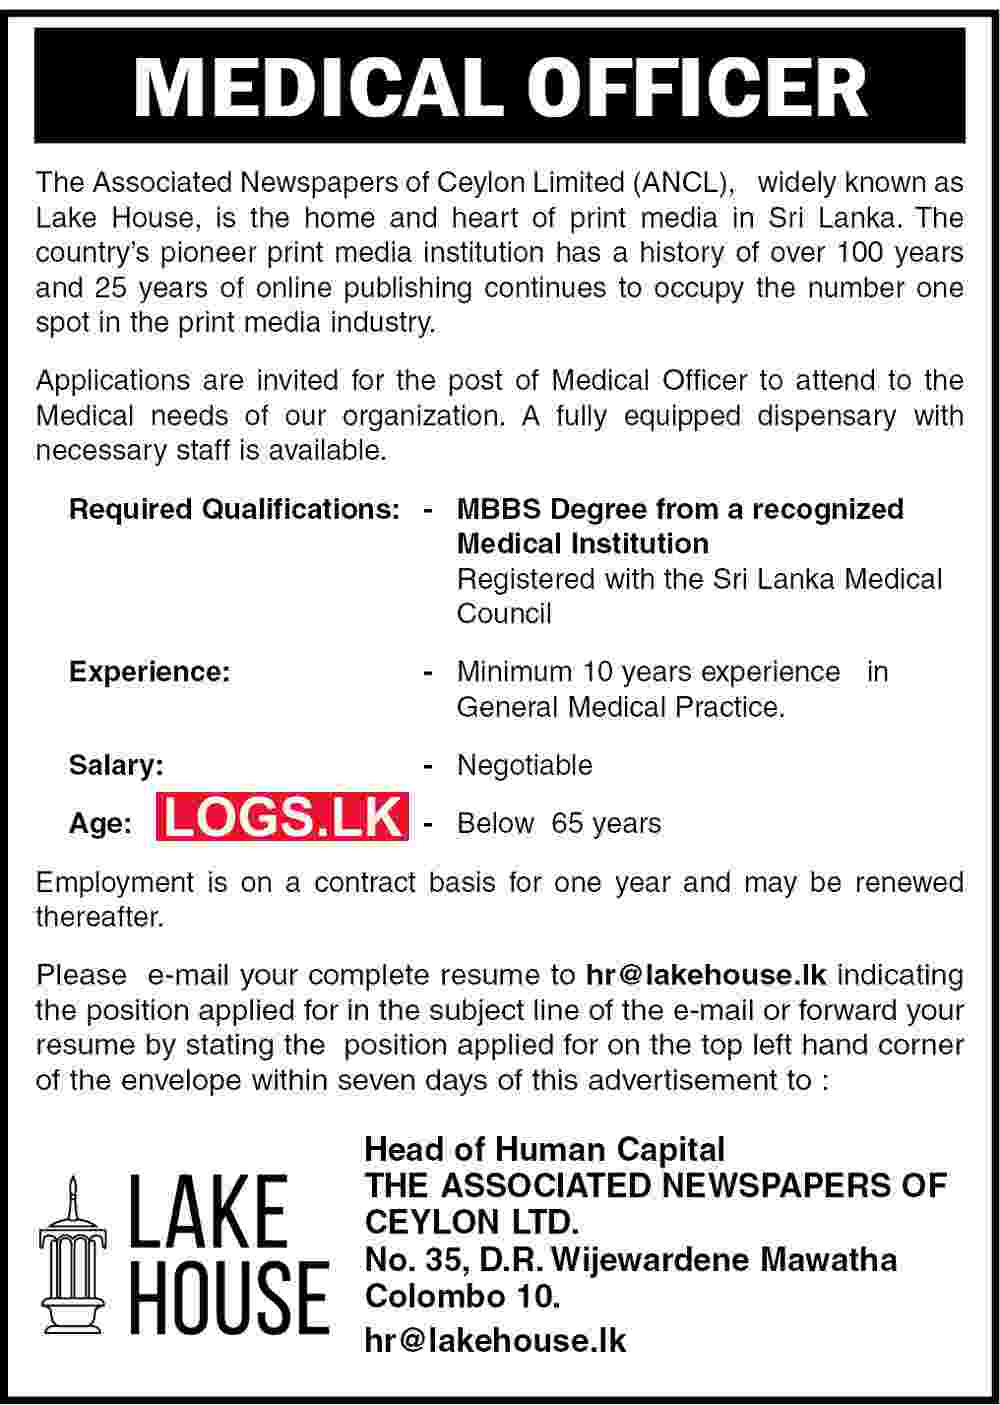 Medical Officer Job Vacancy 2022 in The Associated Newspapers